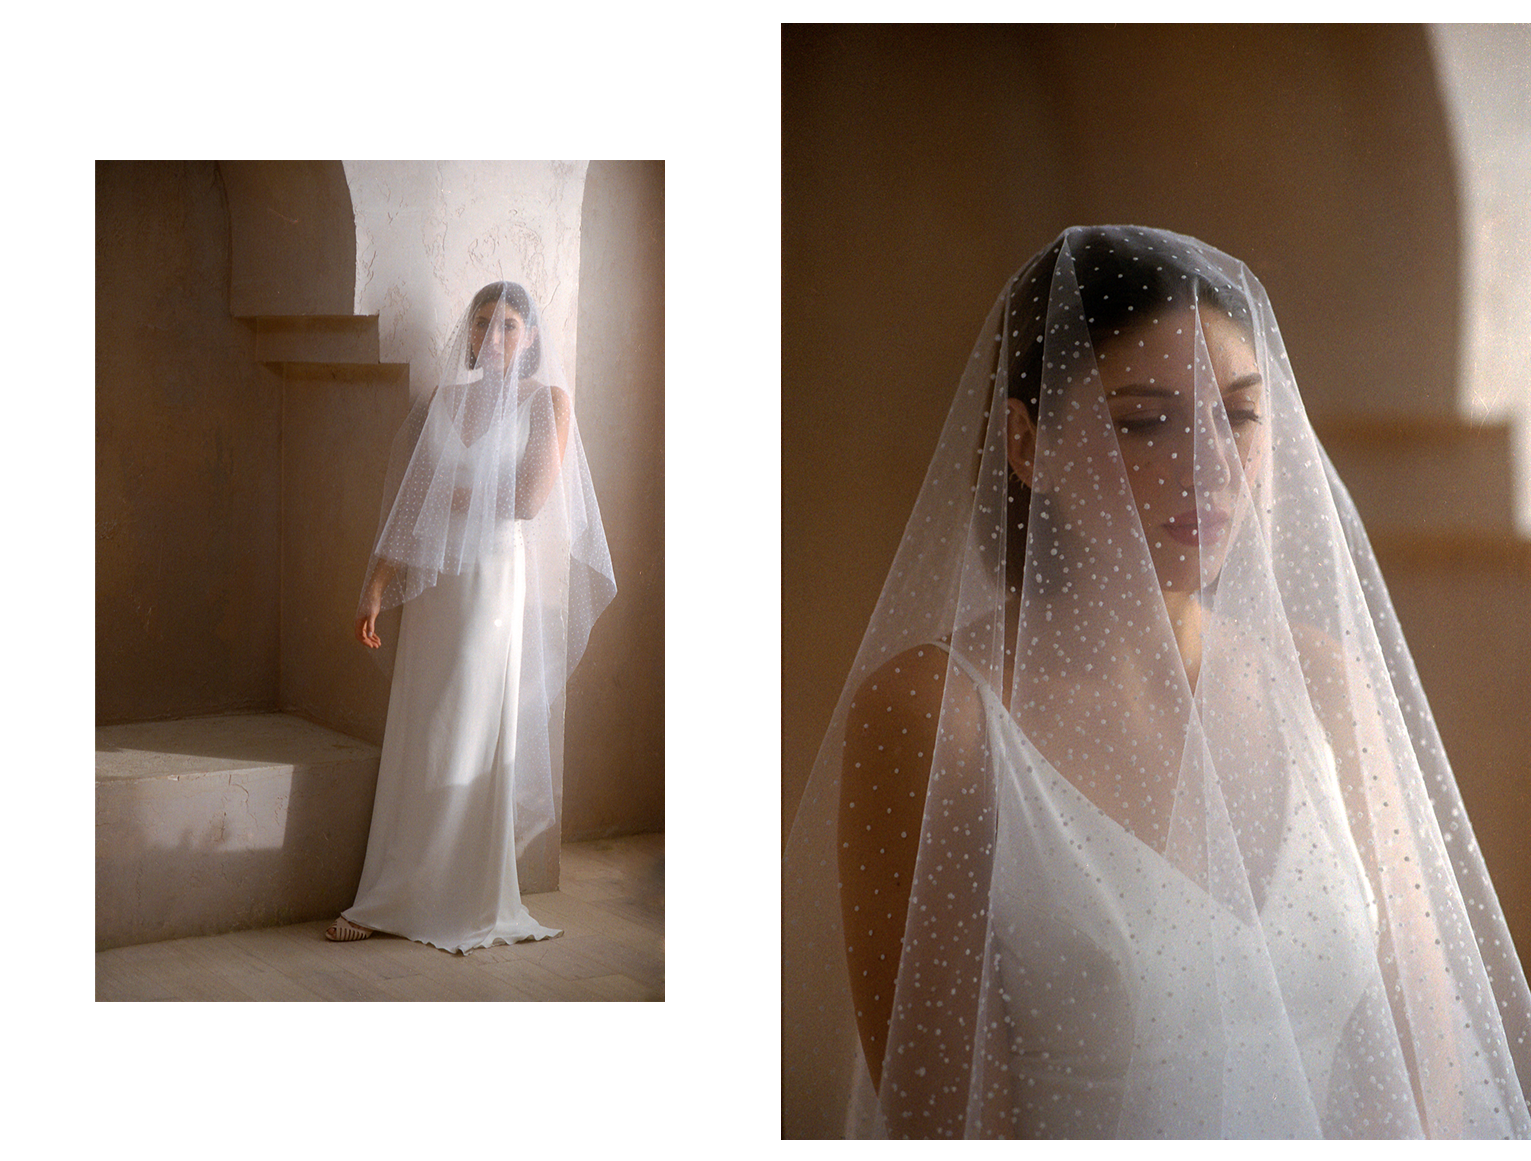 Eclipse-fashion-Bridal-Dress-Designer-Lookbook-Campaign-Collection-trending-Modern-timeless-style-1.png